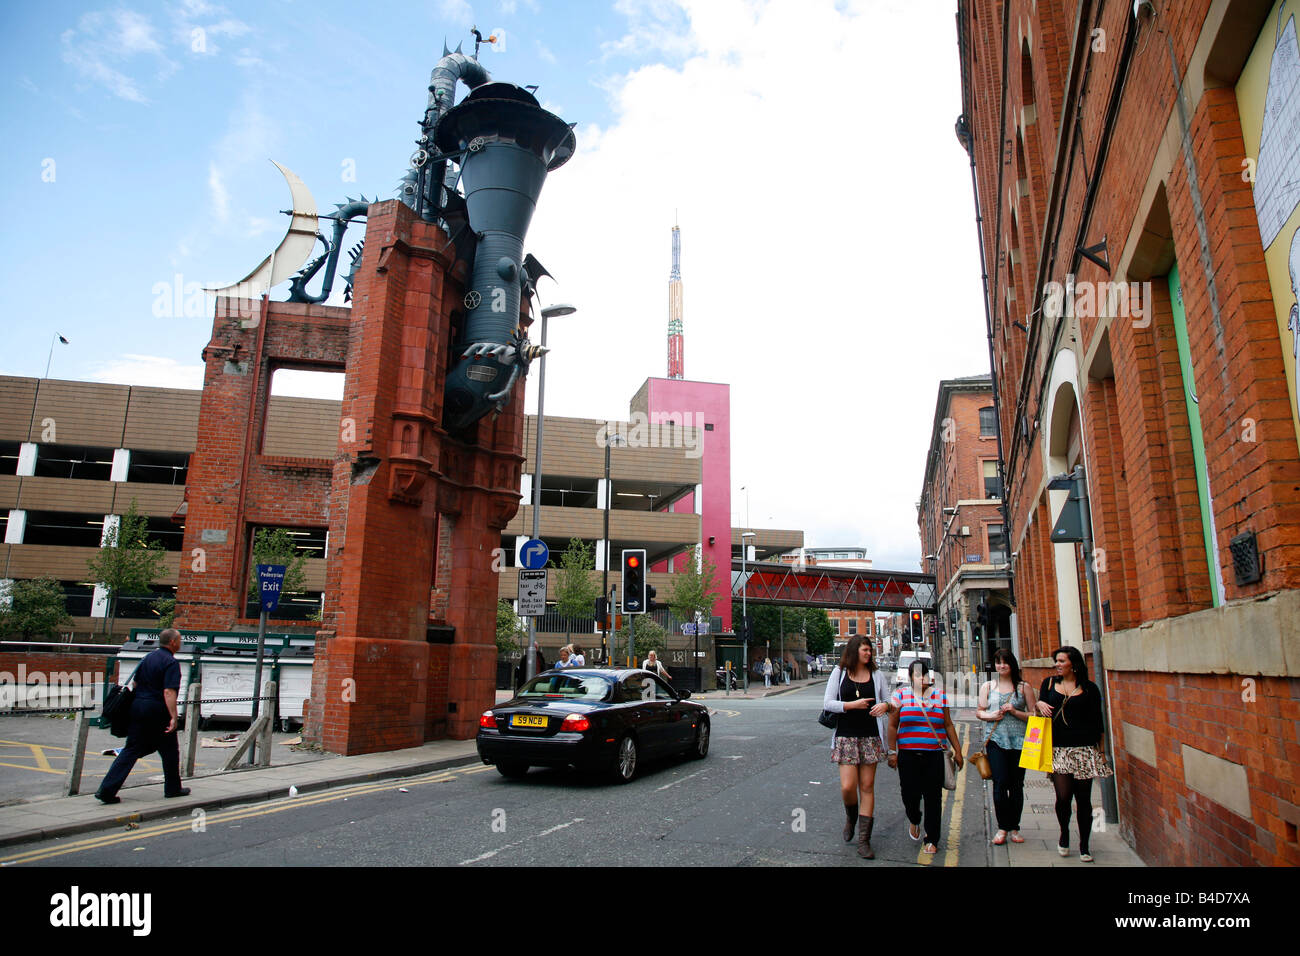 Aug 2008 - The Horn Affleck s Palace in the Northern Quarter Manchester England UK Stock Photo